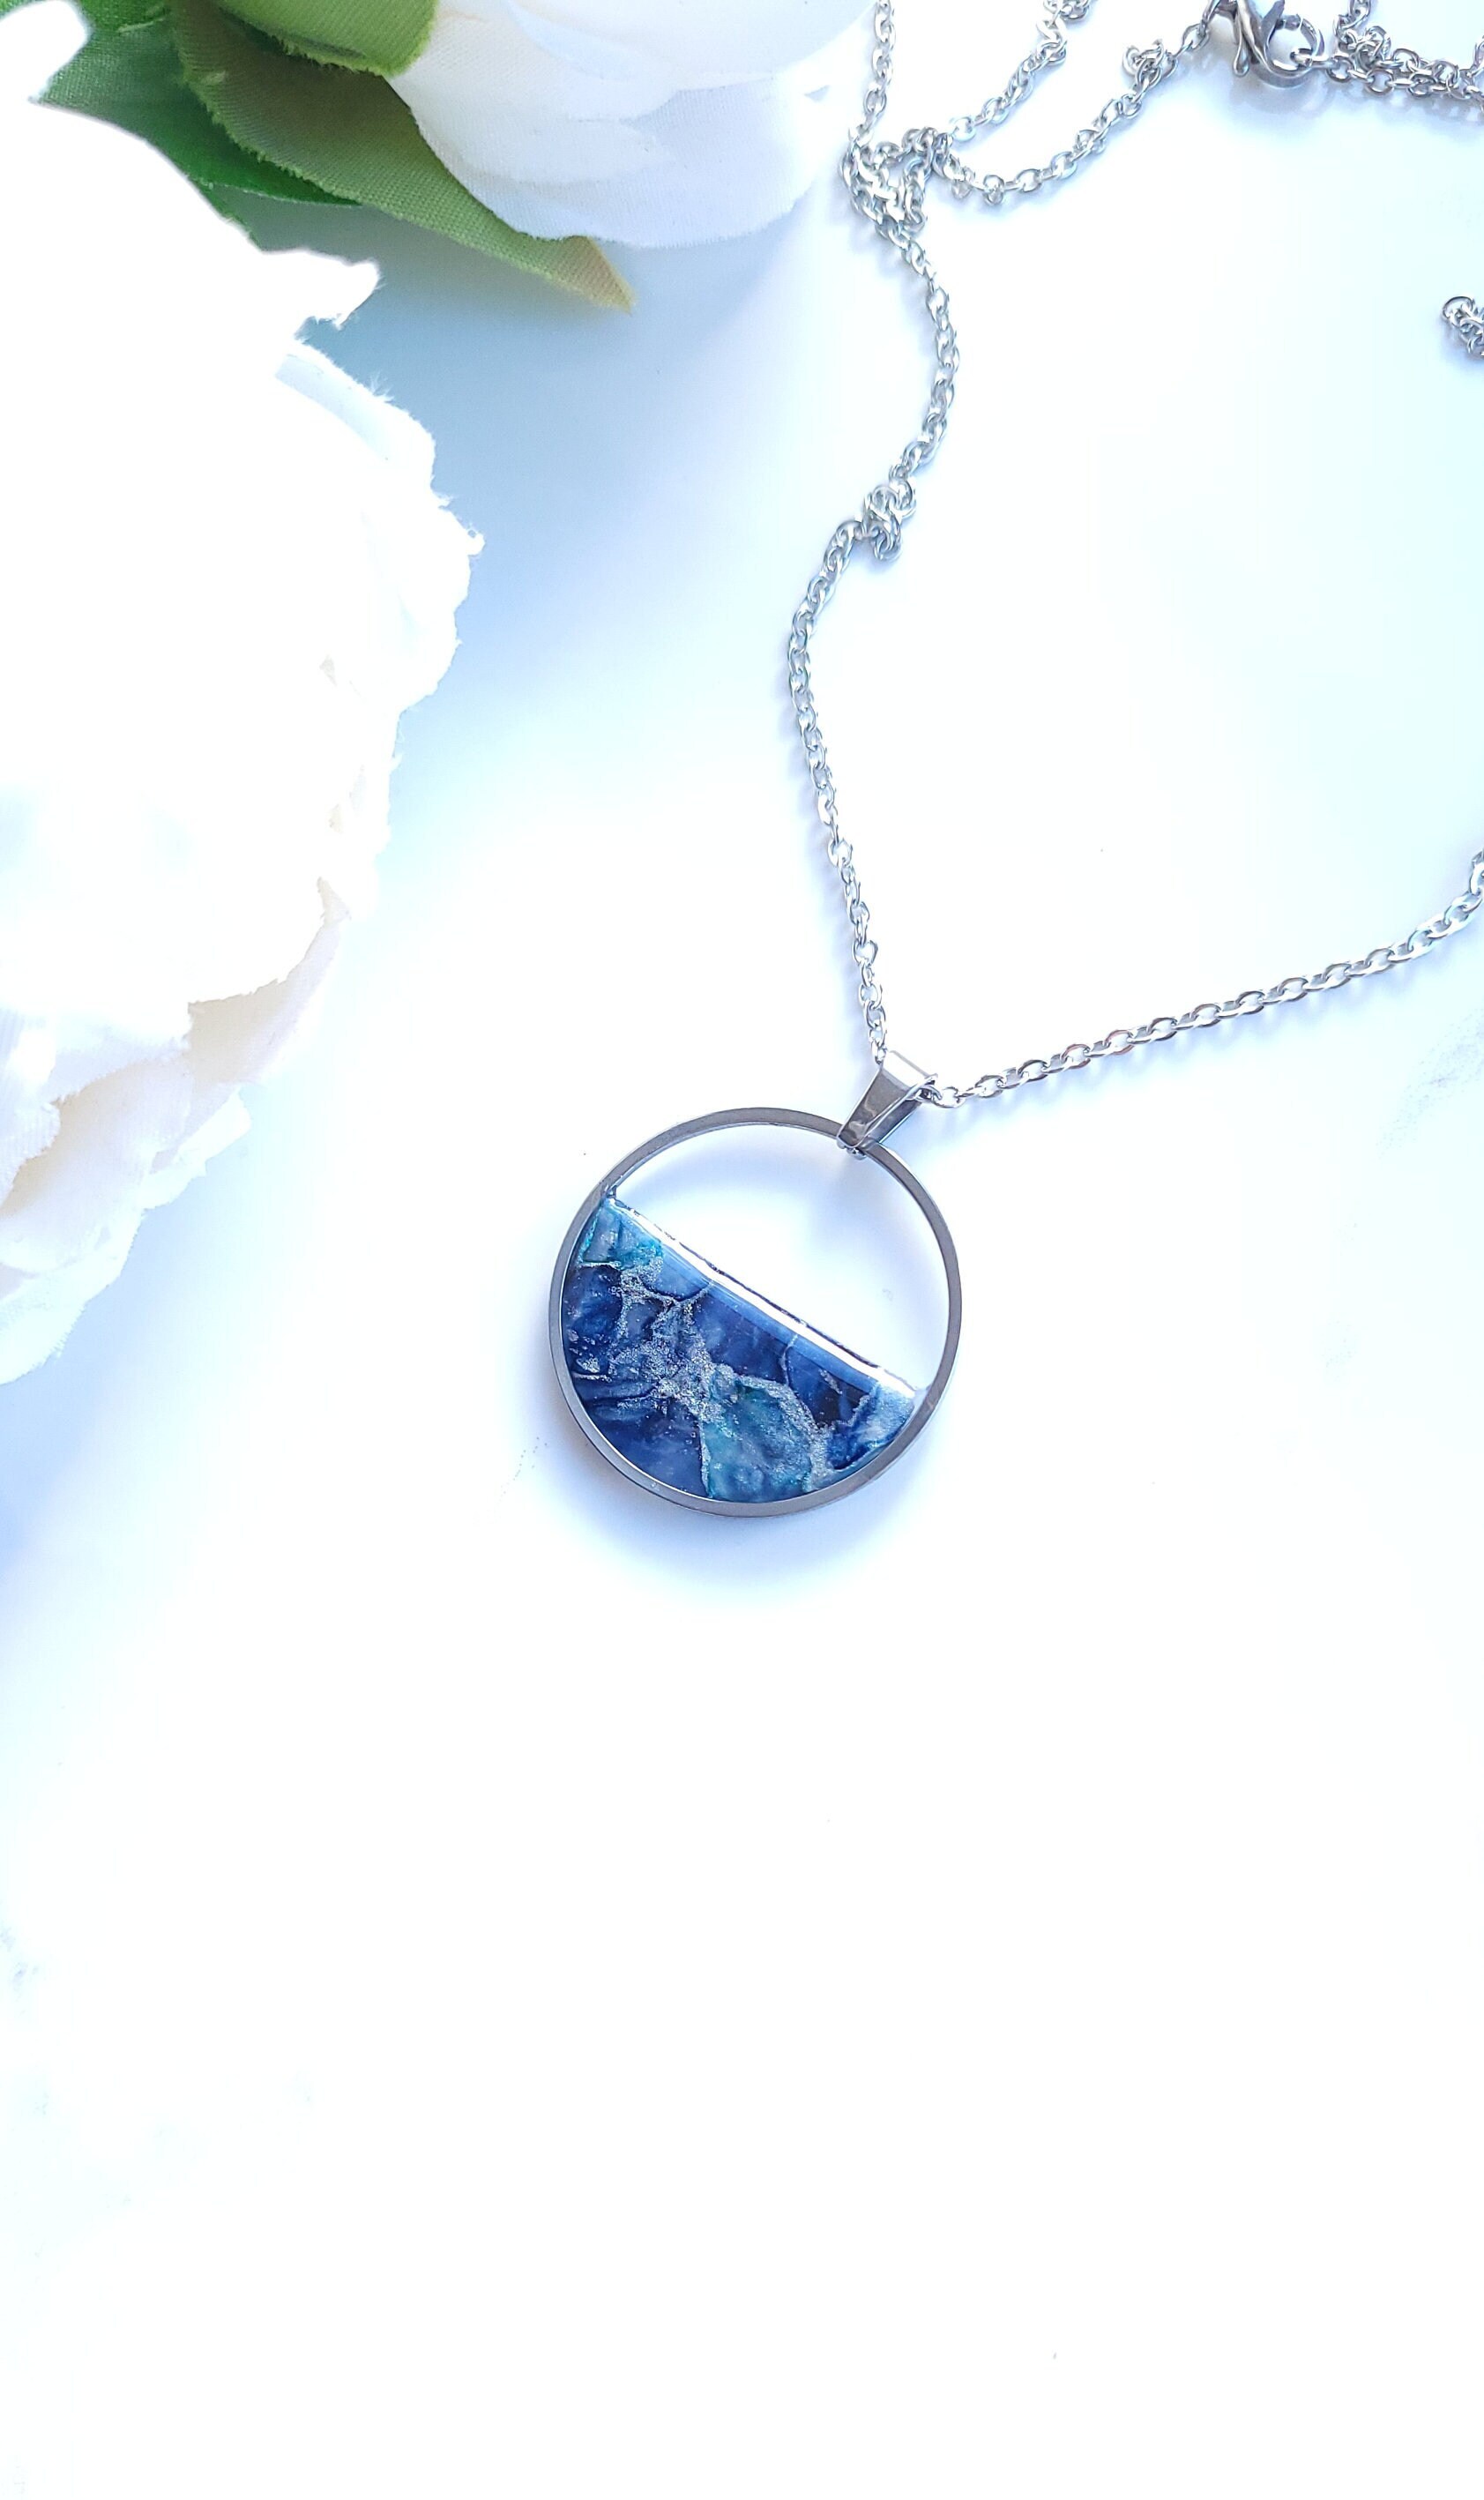 Dark Blue, Turquoise & Silver Marble Pendant Necklace | Handmade Polymer Clay Unique